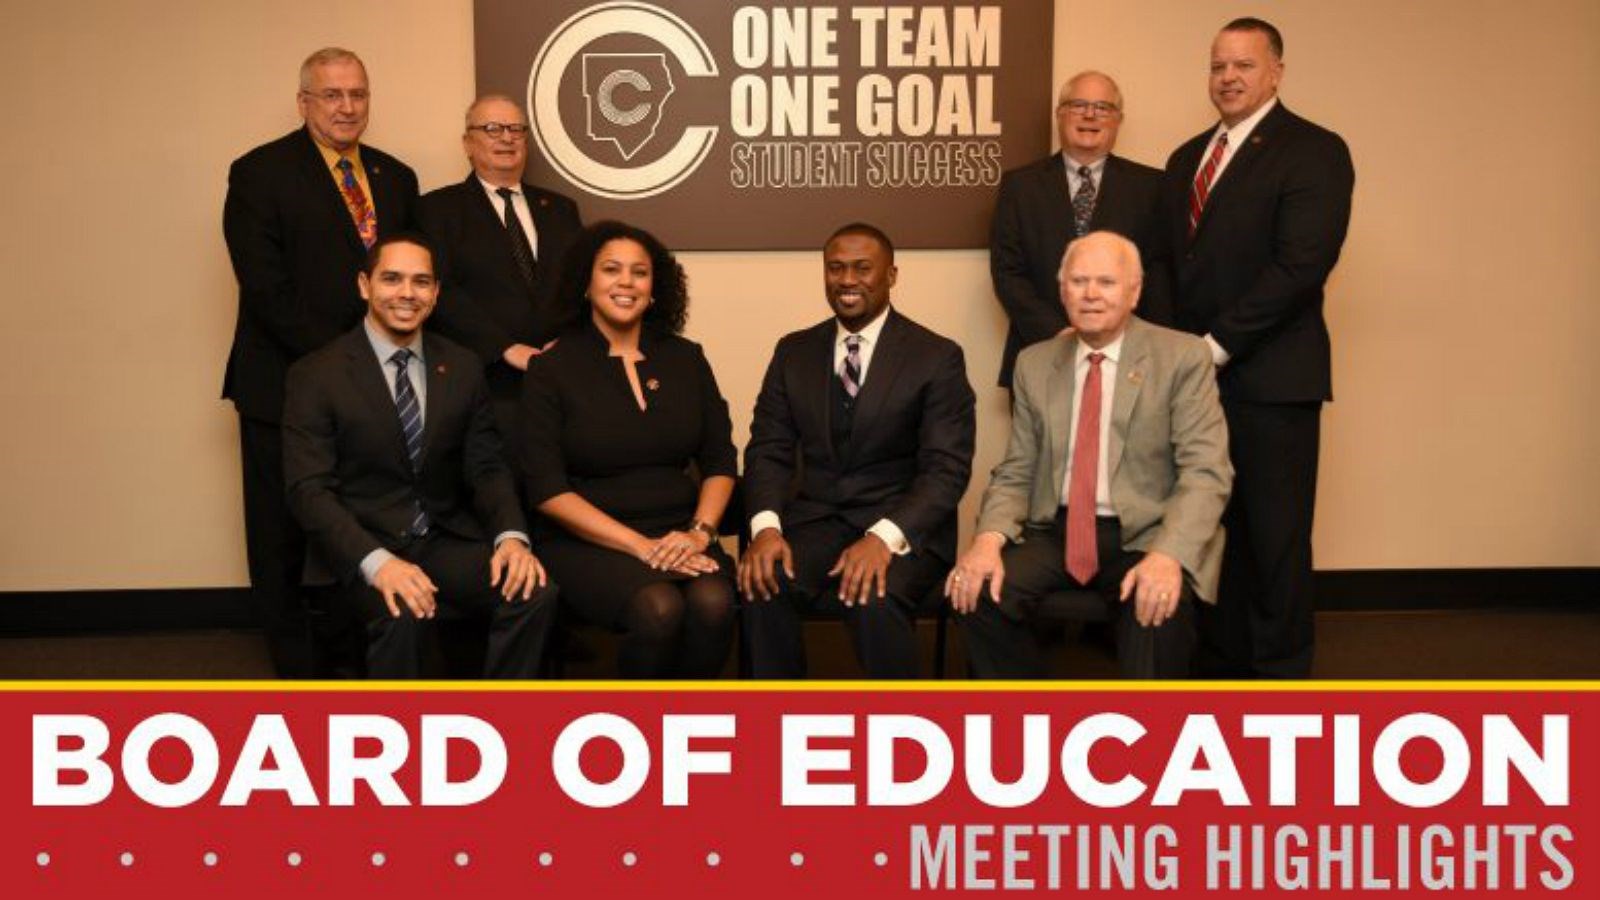 Board of Education Meeting Highlights Image